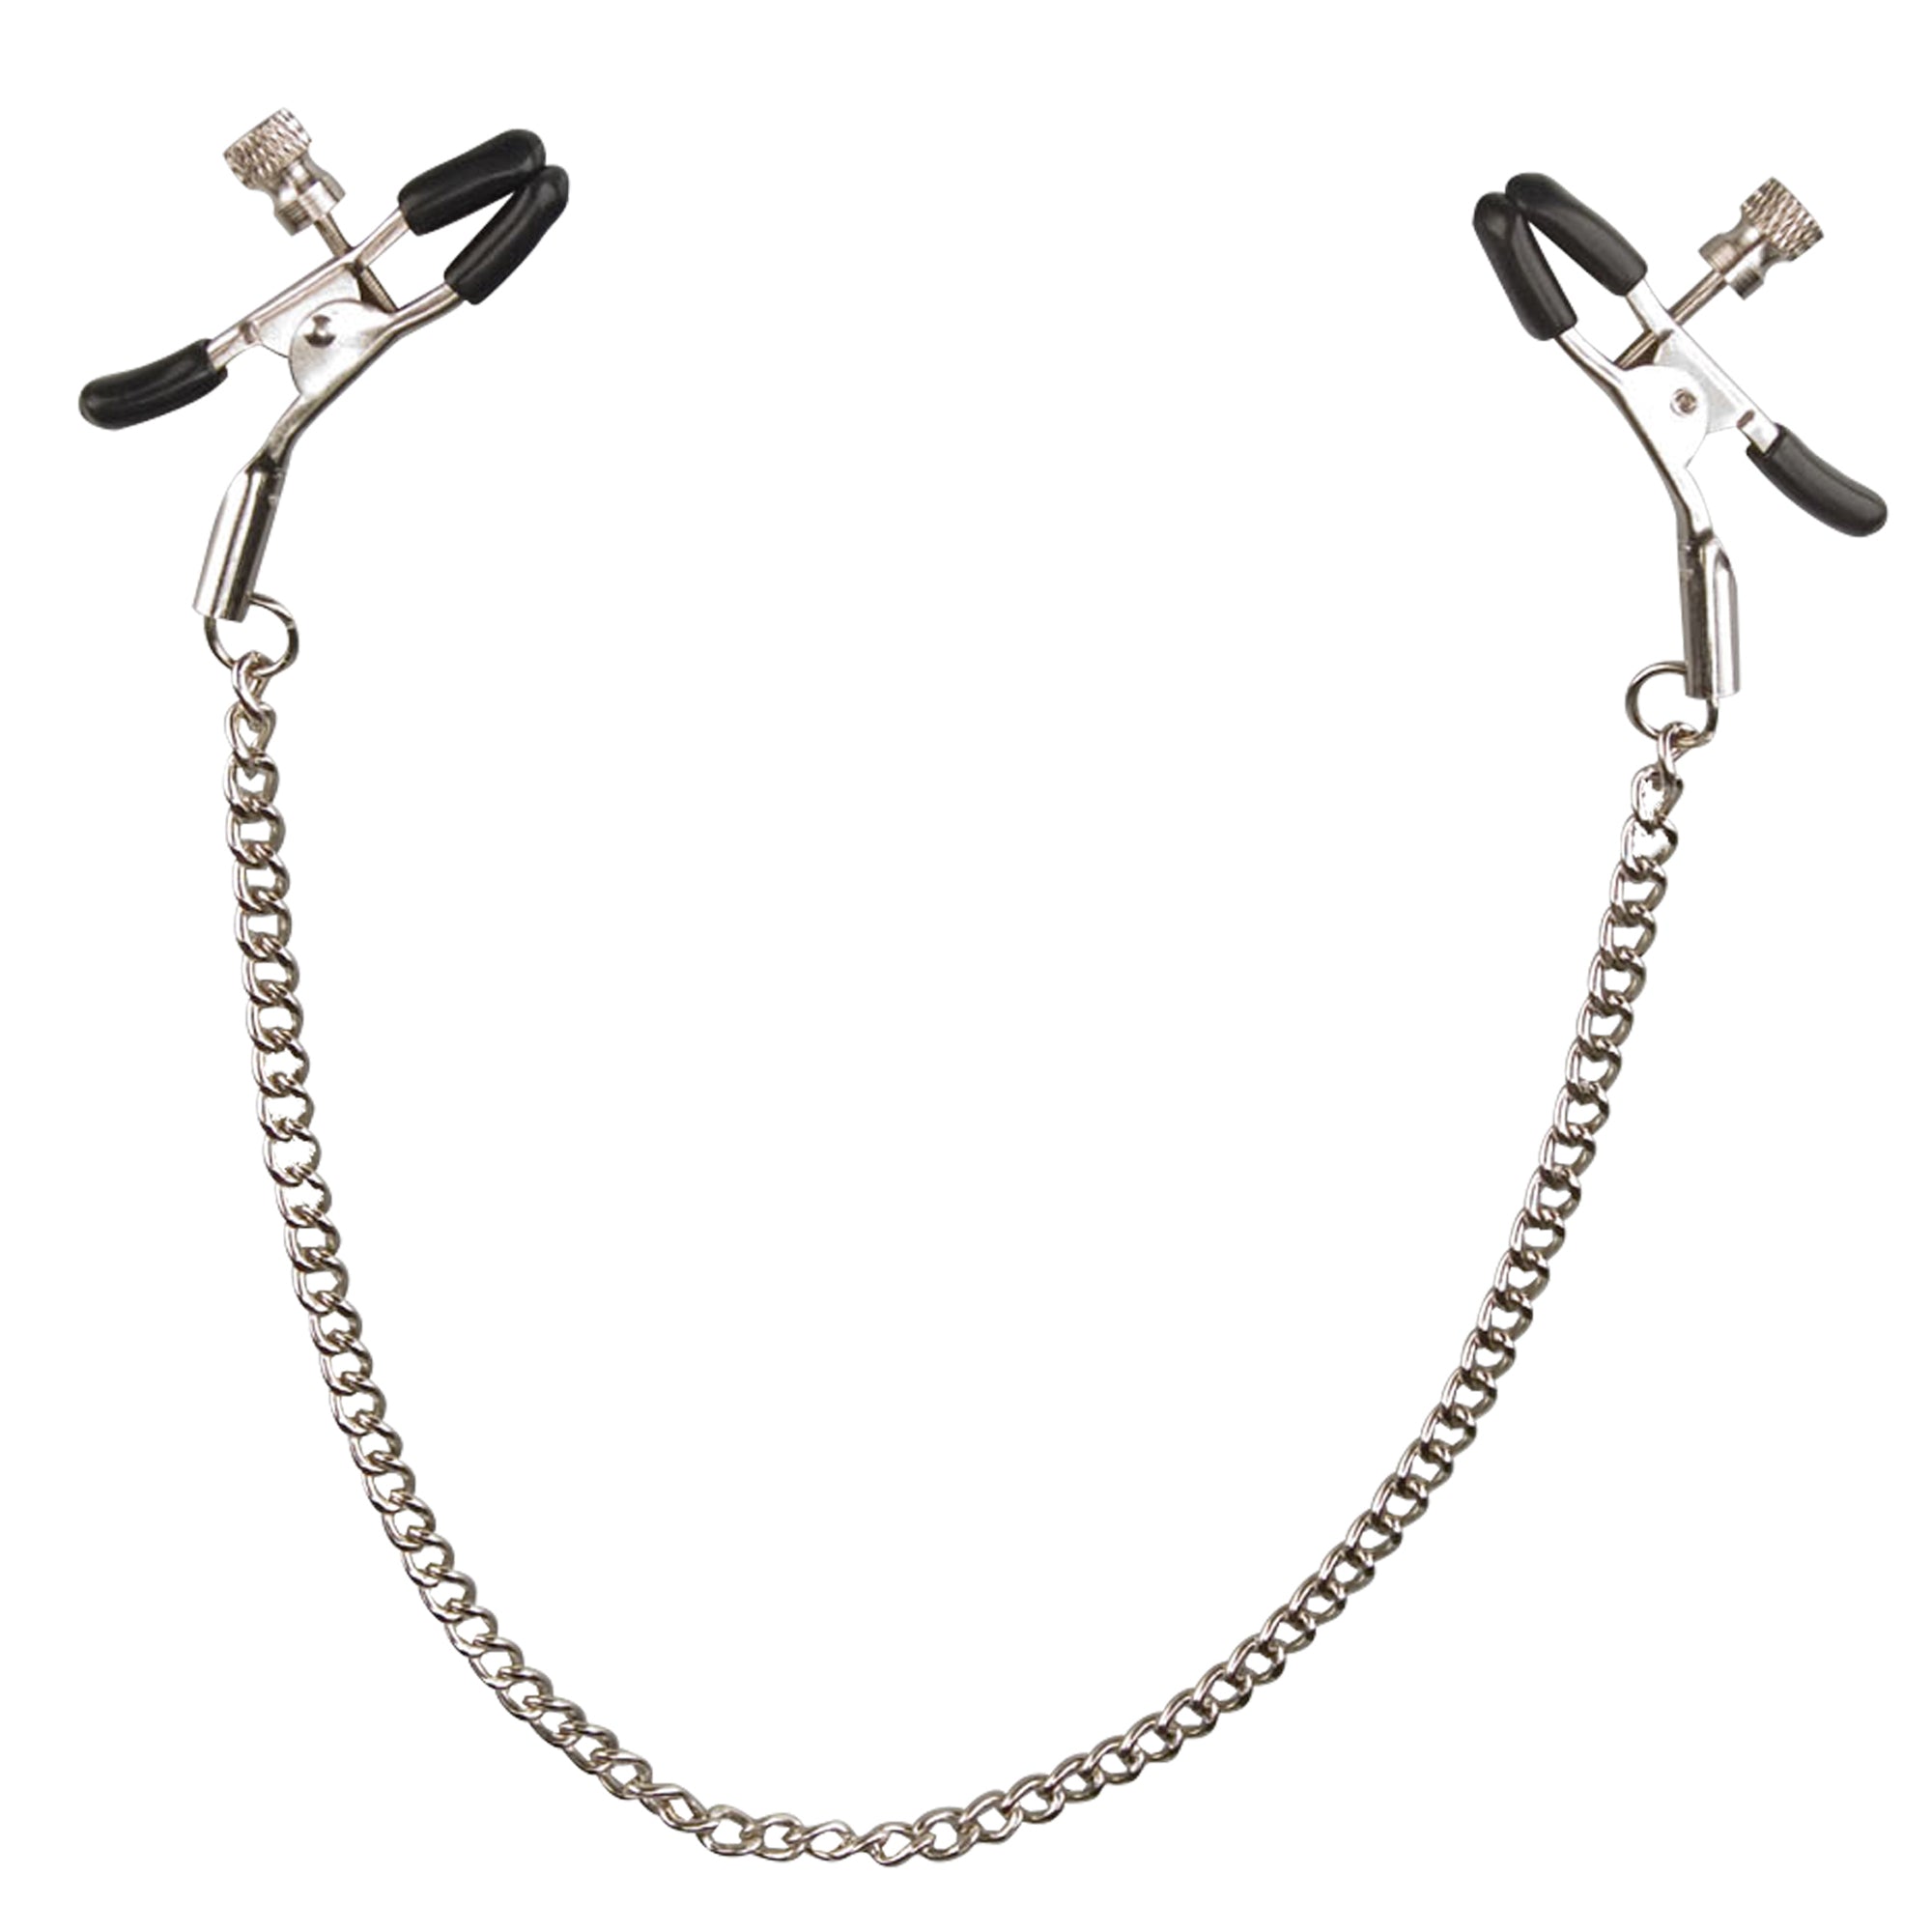 Lux Fetish Adjustable Nipple Clips with Chain